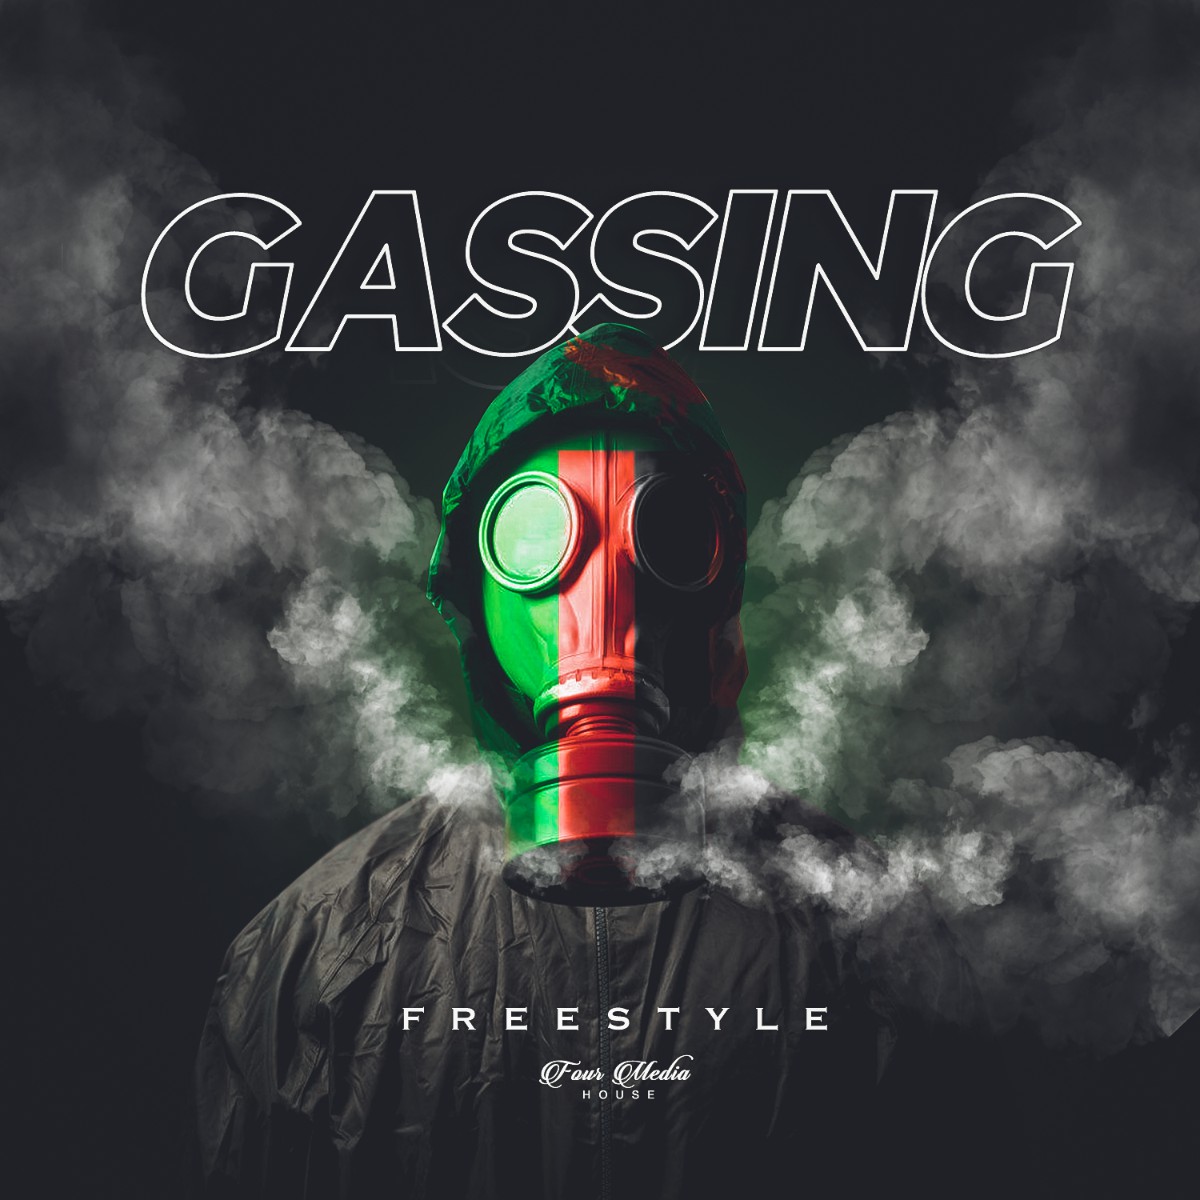 Chef 187 - Gassing (Freestyle)